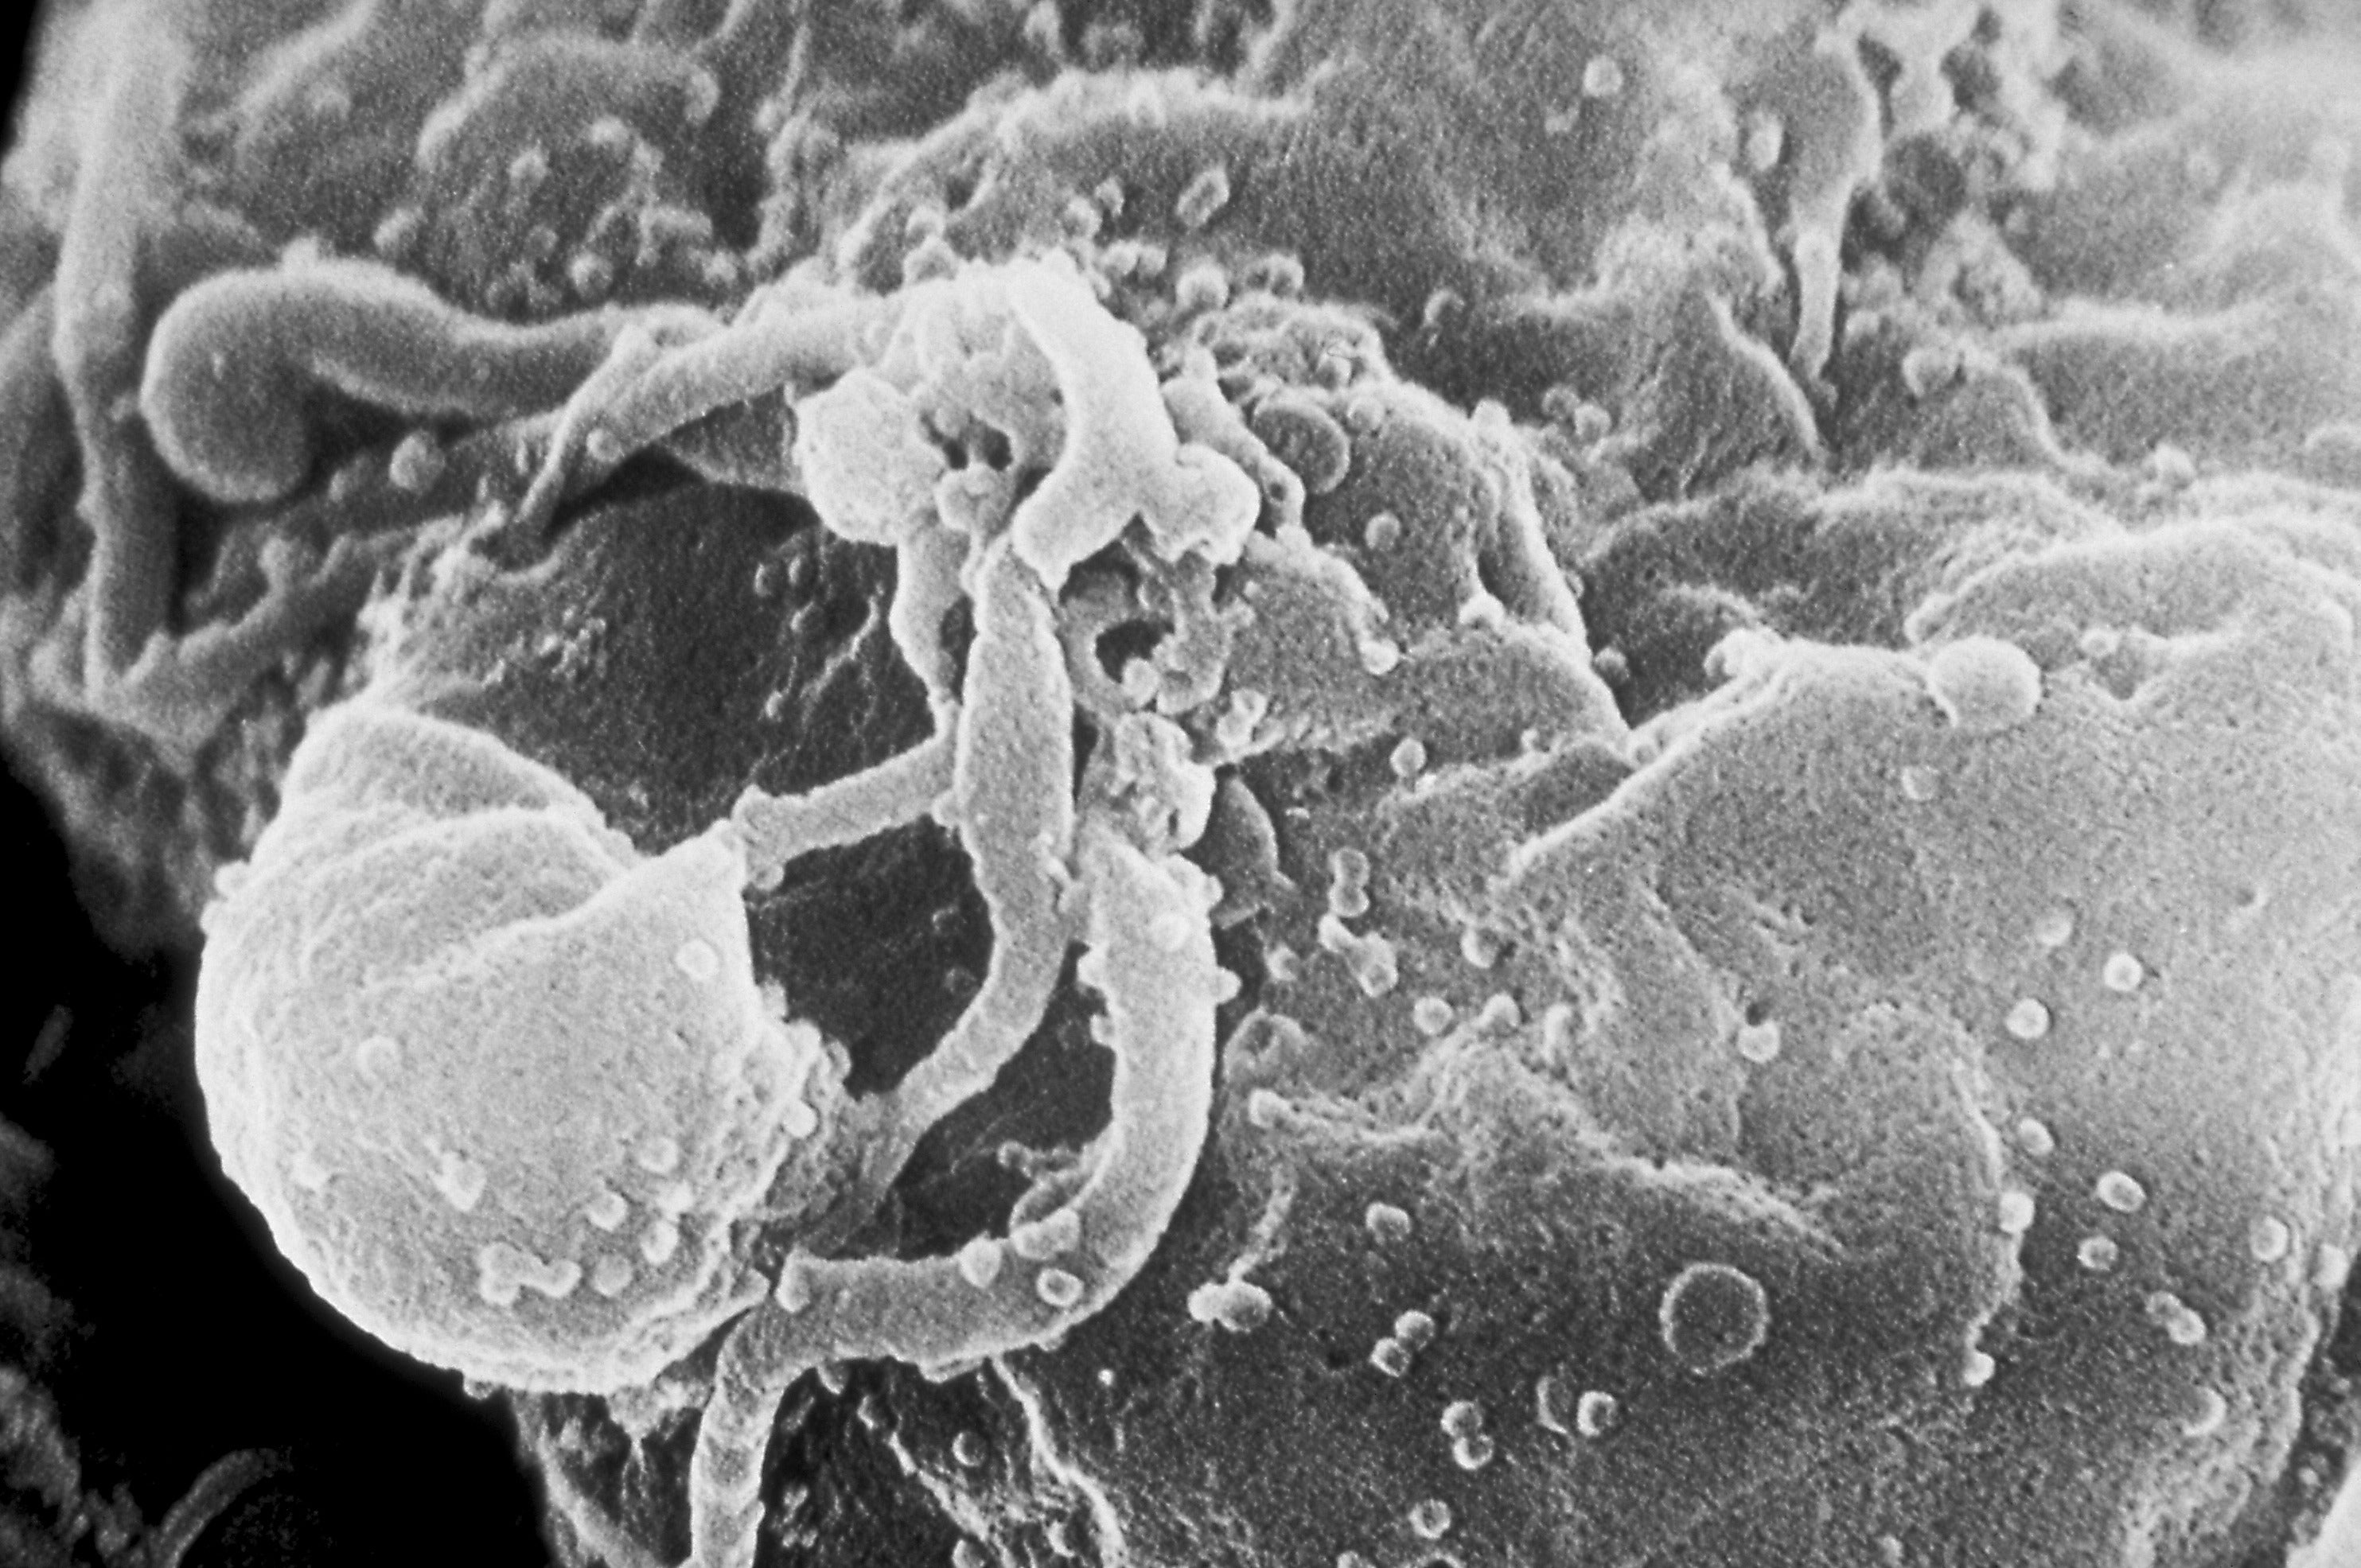 A scanning electron microscopic (SEM) image of (HIV-1) virions, seen as small round bumps. (Image: CDC/ C. Goldsmith)